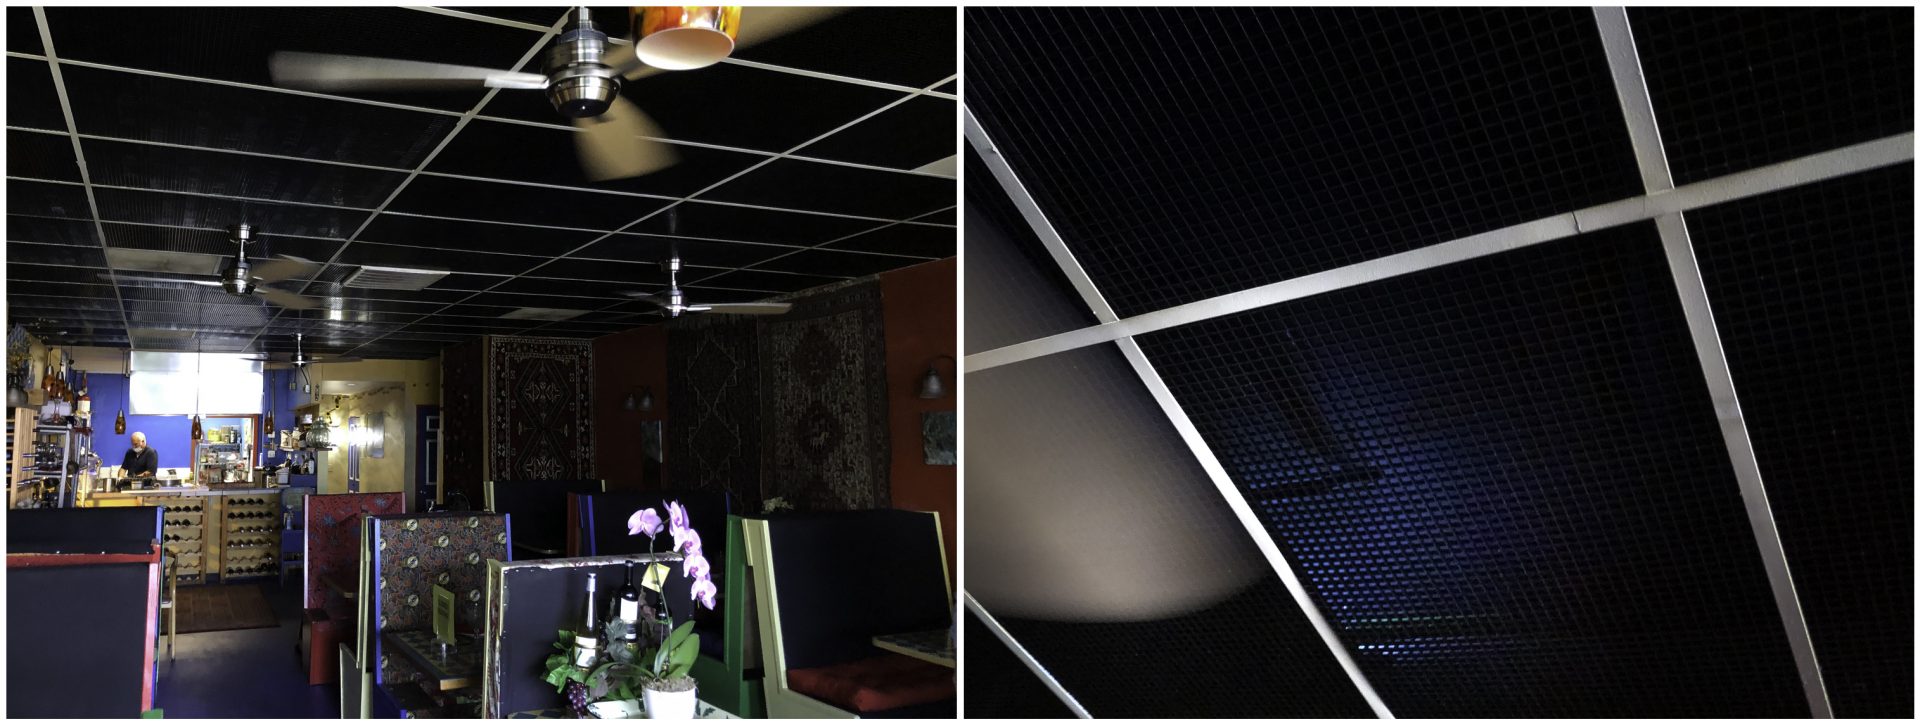 Left: The inside of Marlaina's Mediterranean Eatery. Right: The faint blue glow of ultraviolet fixtures mounted above the restaurant's ceiling panels create a "killing zone" that can wipe out viral aerosols that build up in the air. Some experts are calling for wider adoption of UV light to help disinfect the air in indoor settings.